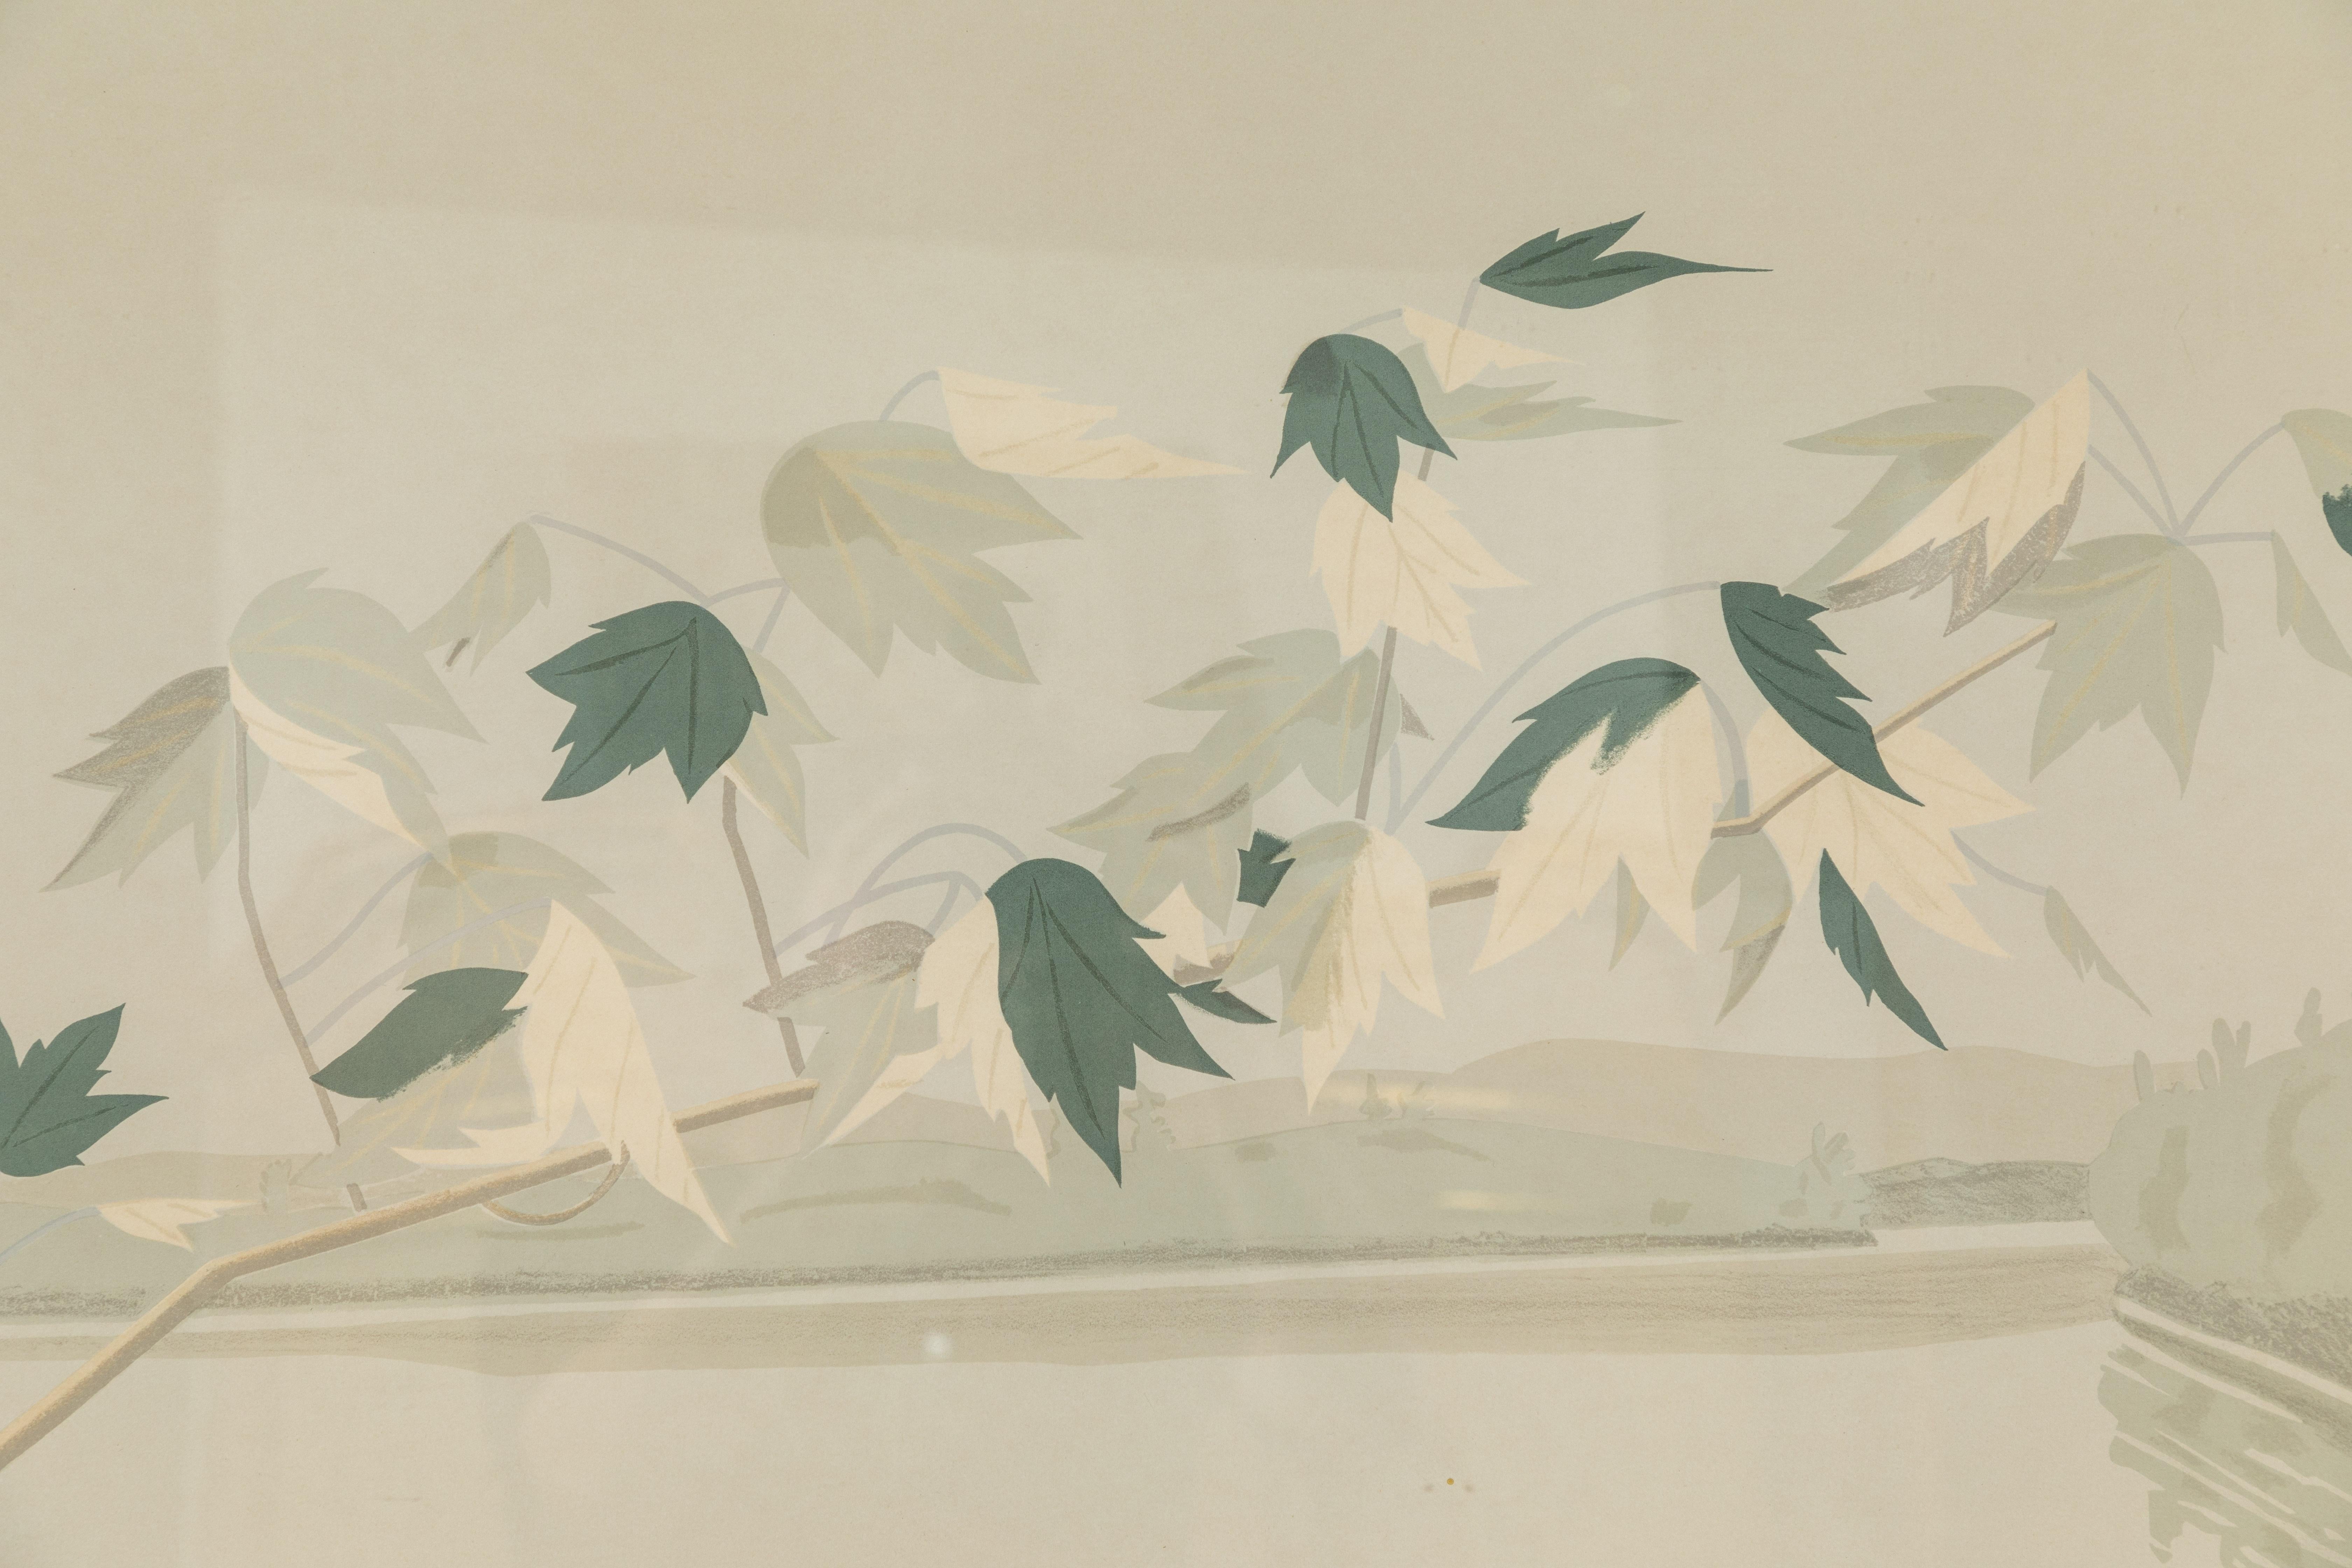 1971, seven color lithograph on Arches paper, Late July 2, by important American artist, Alex Katz (b. 1929). Signed and numbered, 30 /120, lower left. Since 1951 Alex Katz’s work has been the subject of more than 200 solo exhibitions and nearly 500